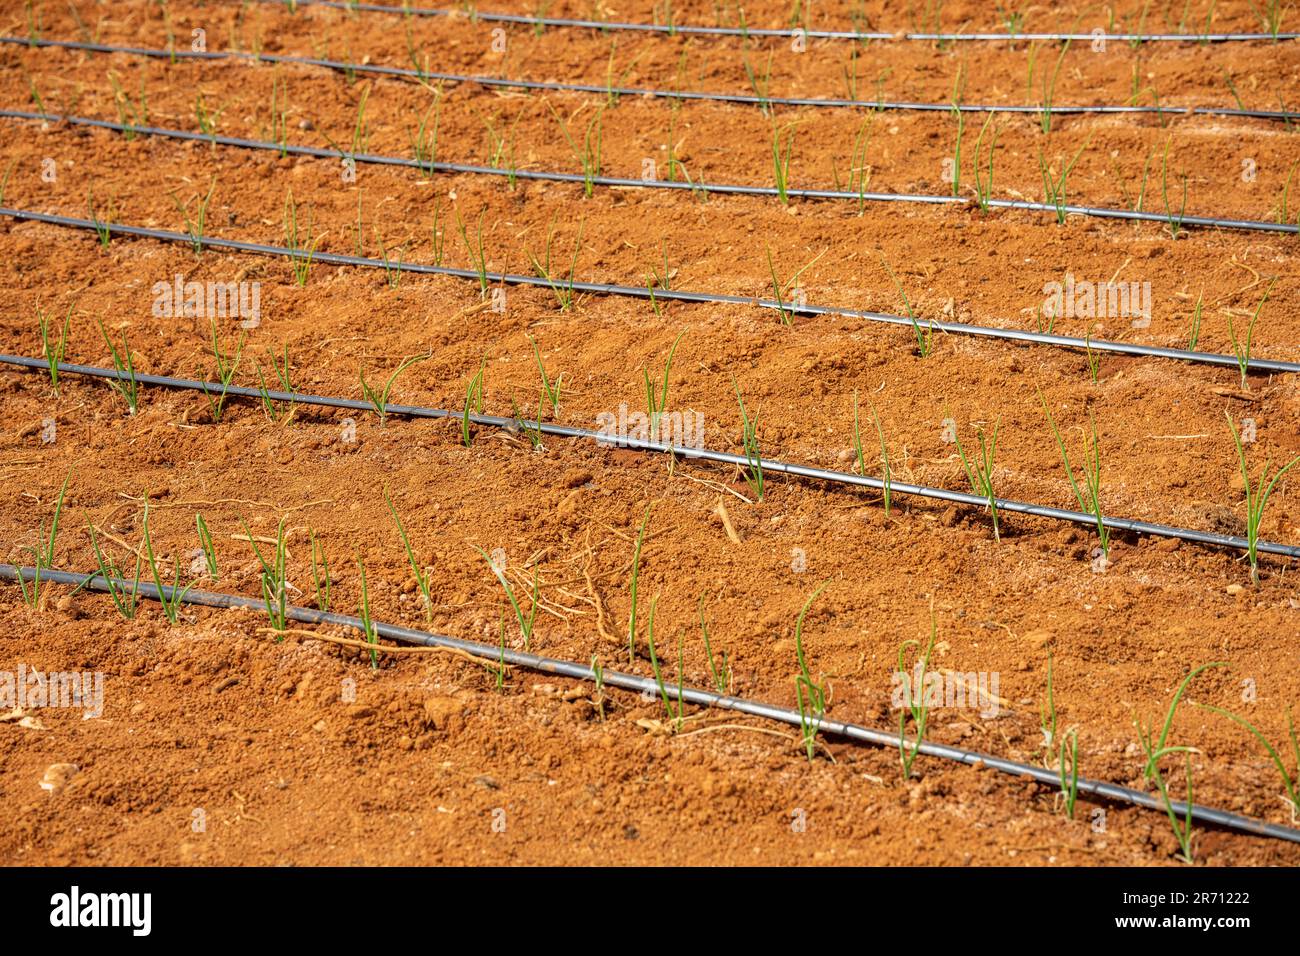 Irrigation system with small emerging plants on very dry soil Stock Photo